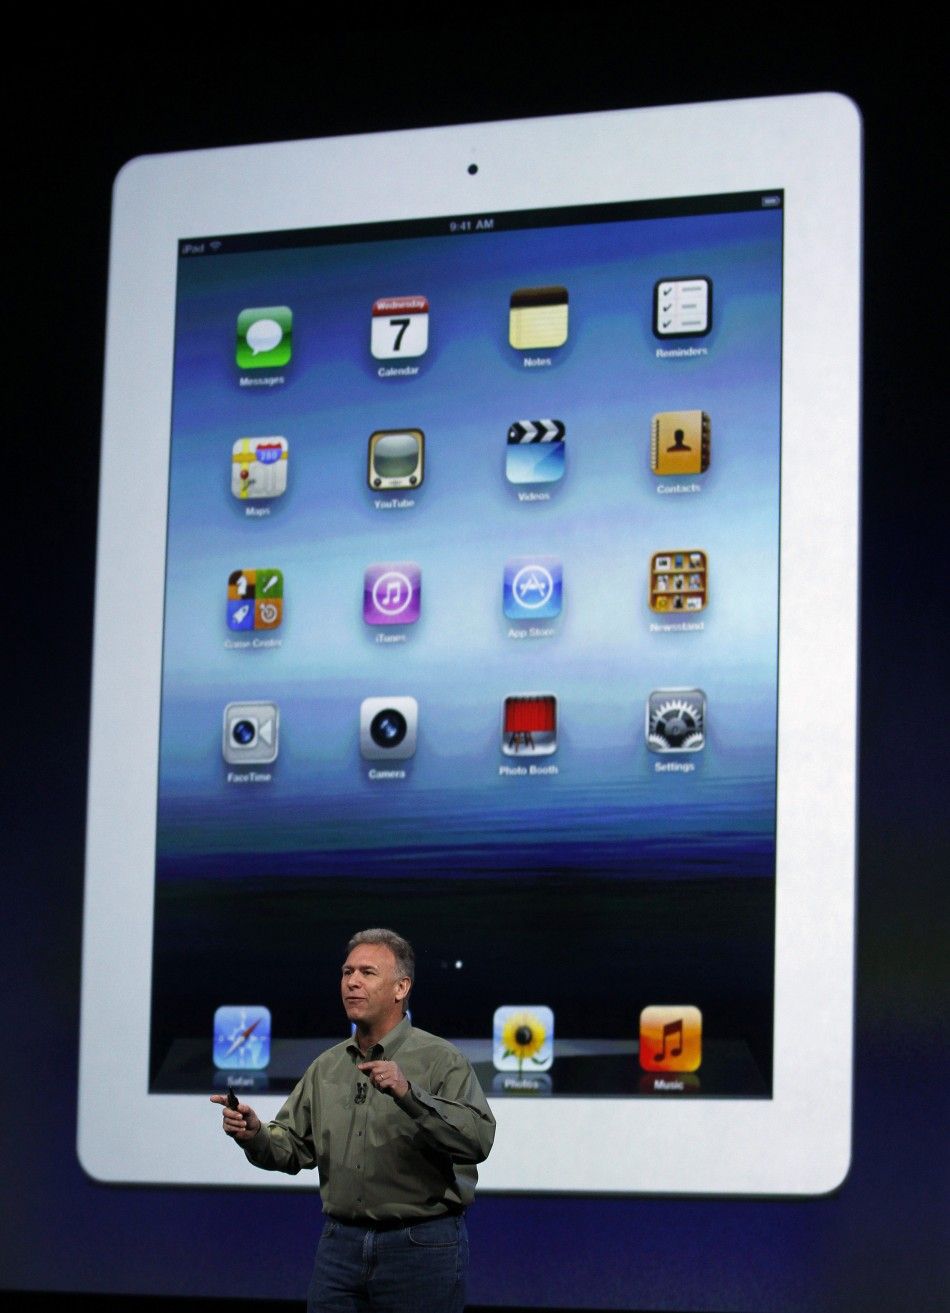 Apples Schiller senior vice president of Worldwide Marketing speaks about the new iPad during an Apple event in San Francisco